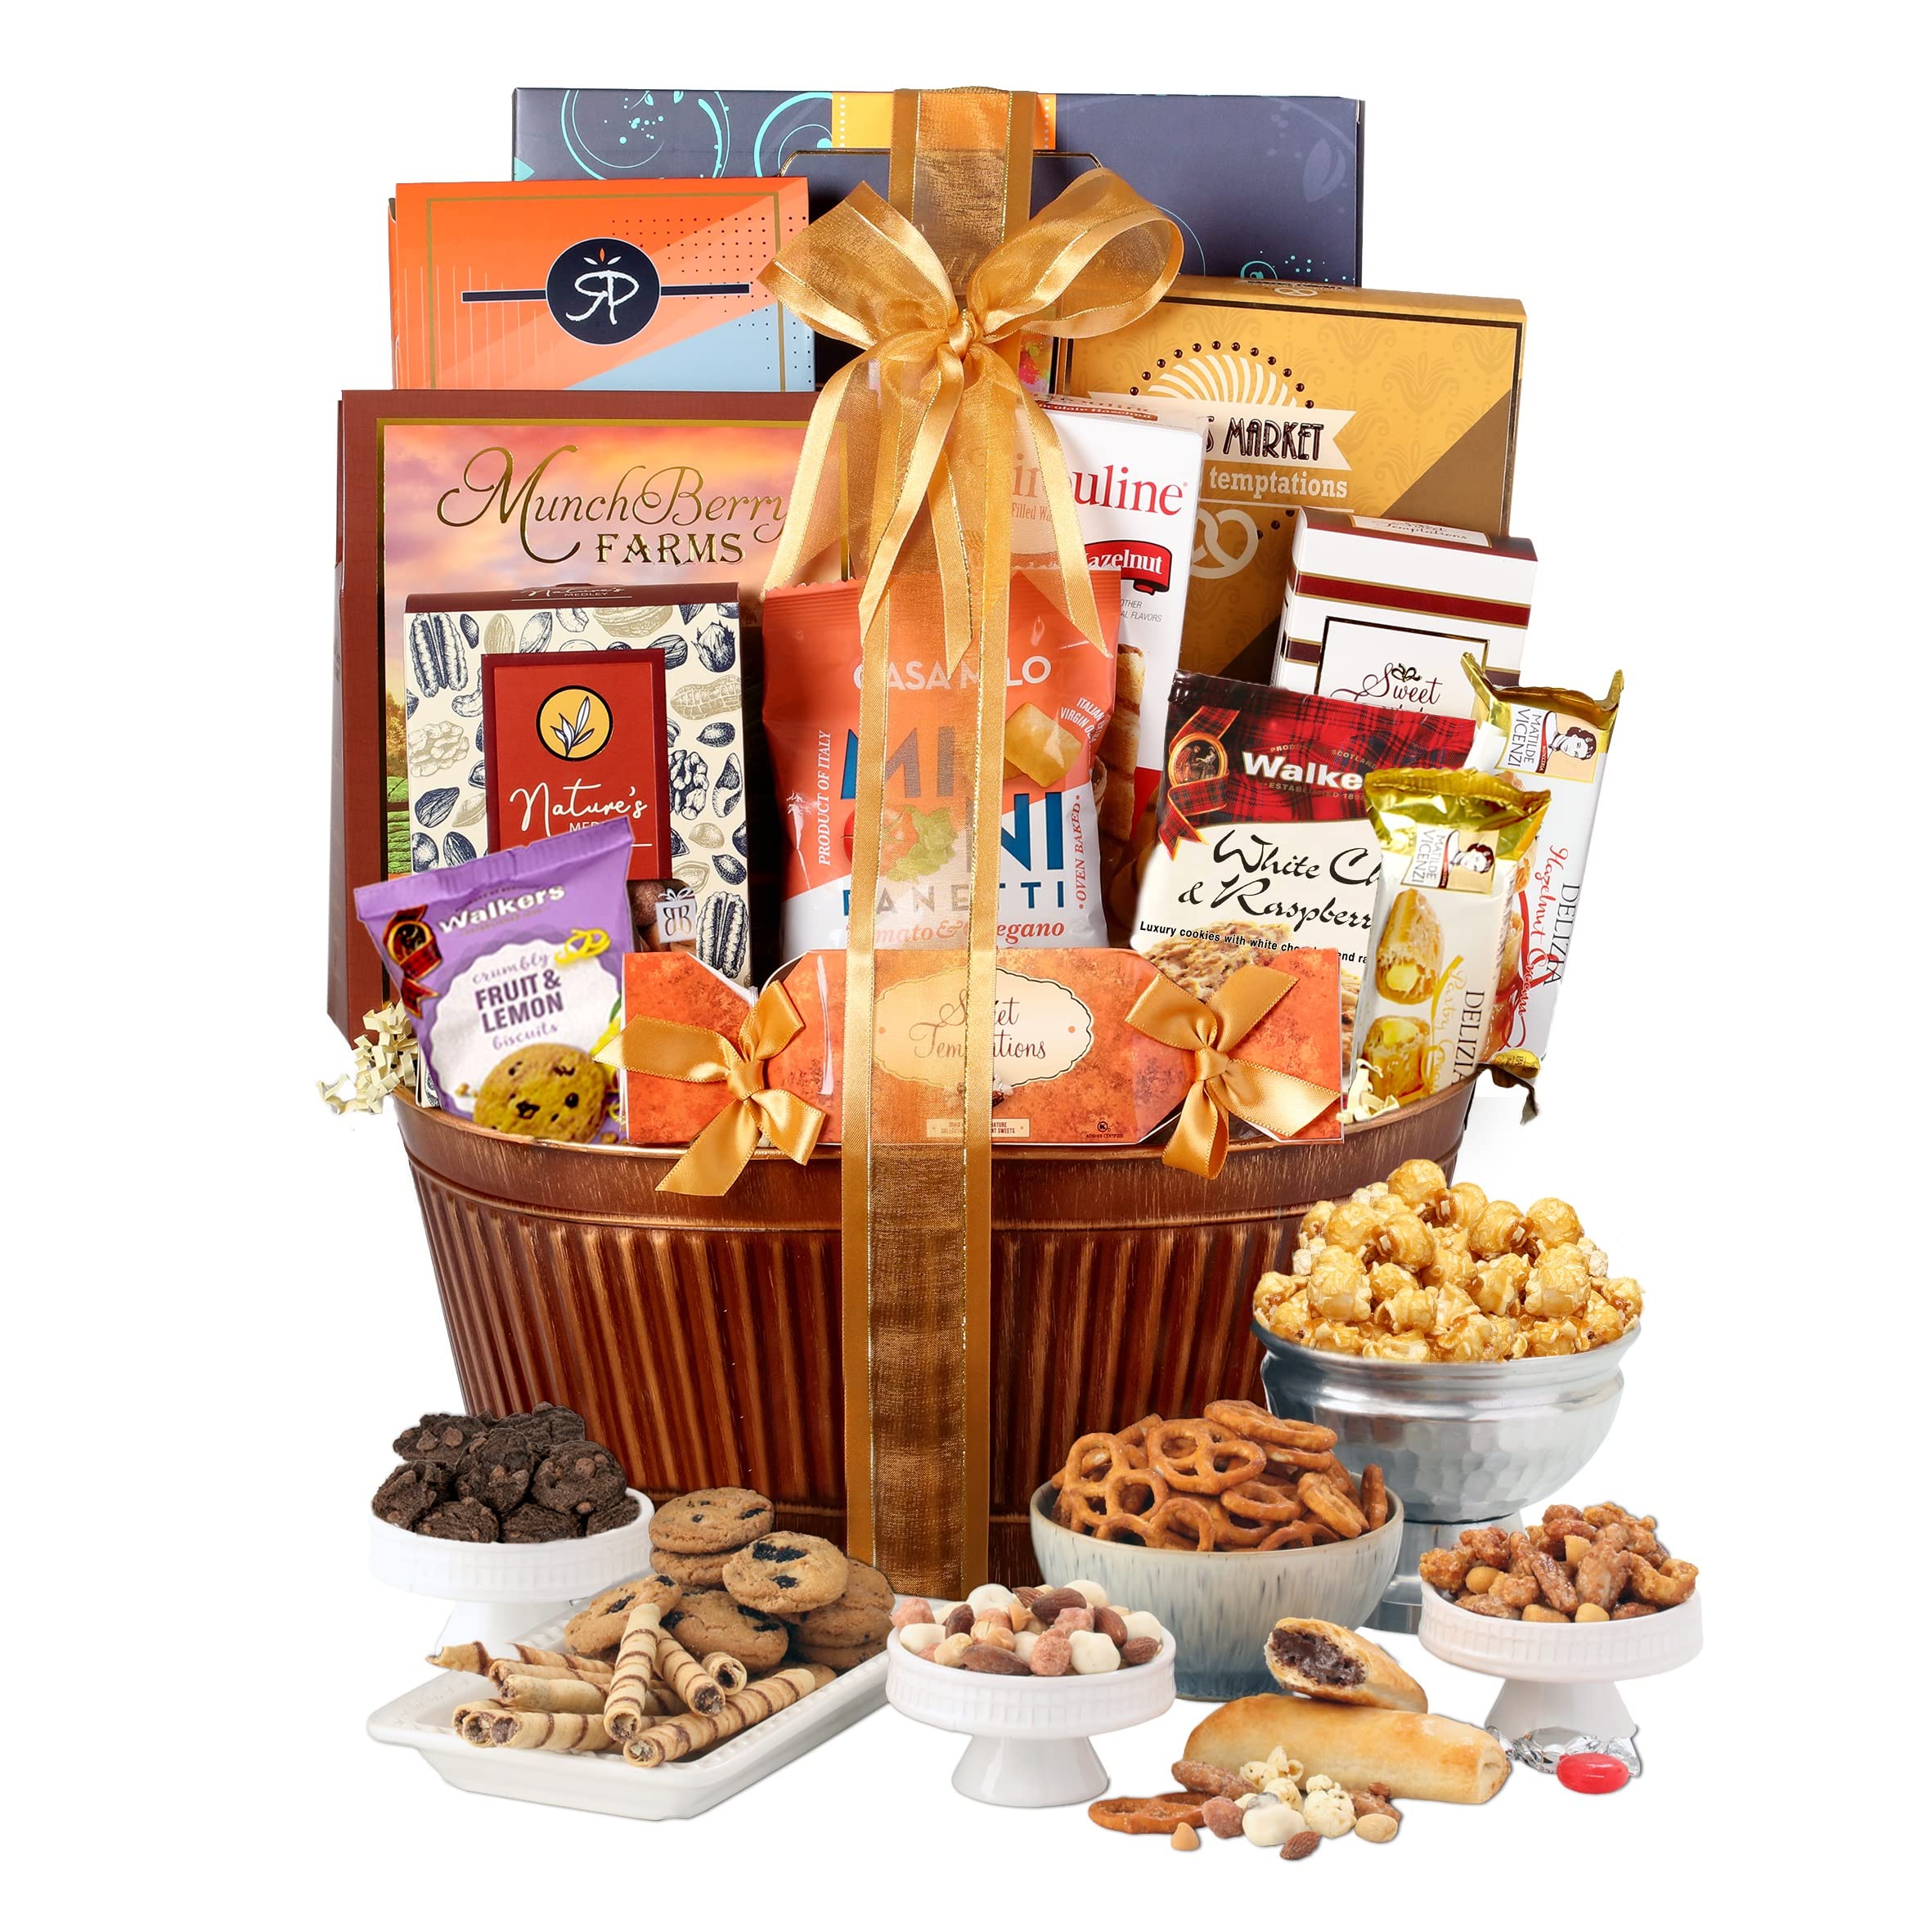 Broadway Basketeers Photo Gift Box with Lid, Gourmet Food, Tea & Cocoa -  Cookies and Snacks Care Package for Women, Men, Families, Memory Box for